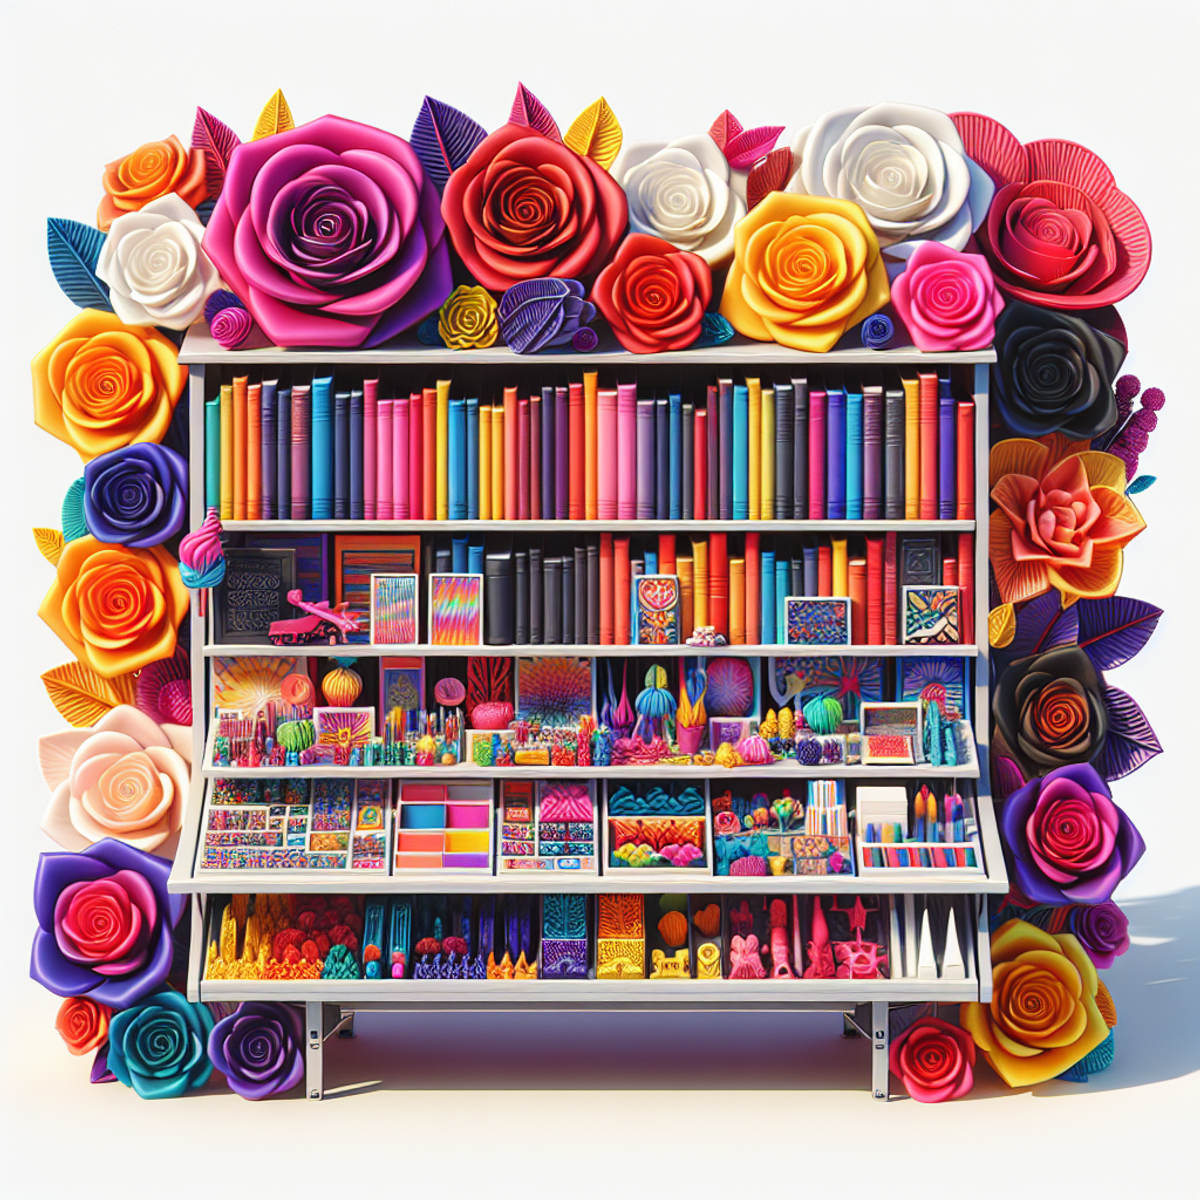 A vibrant outdoor stand with colorful books, assorted roses, and unique 3D printed products.